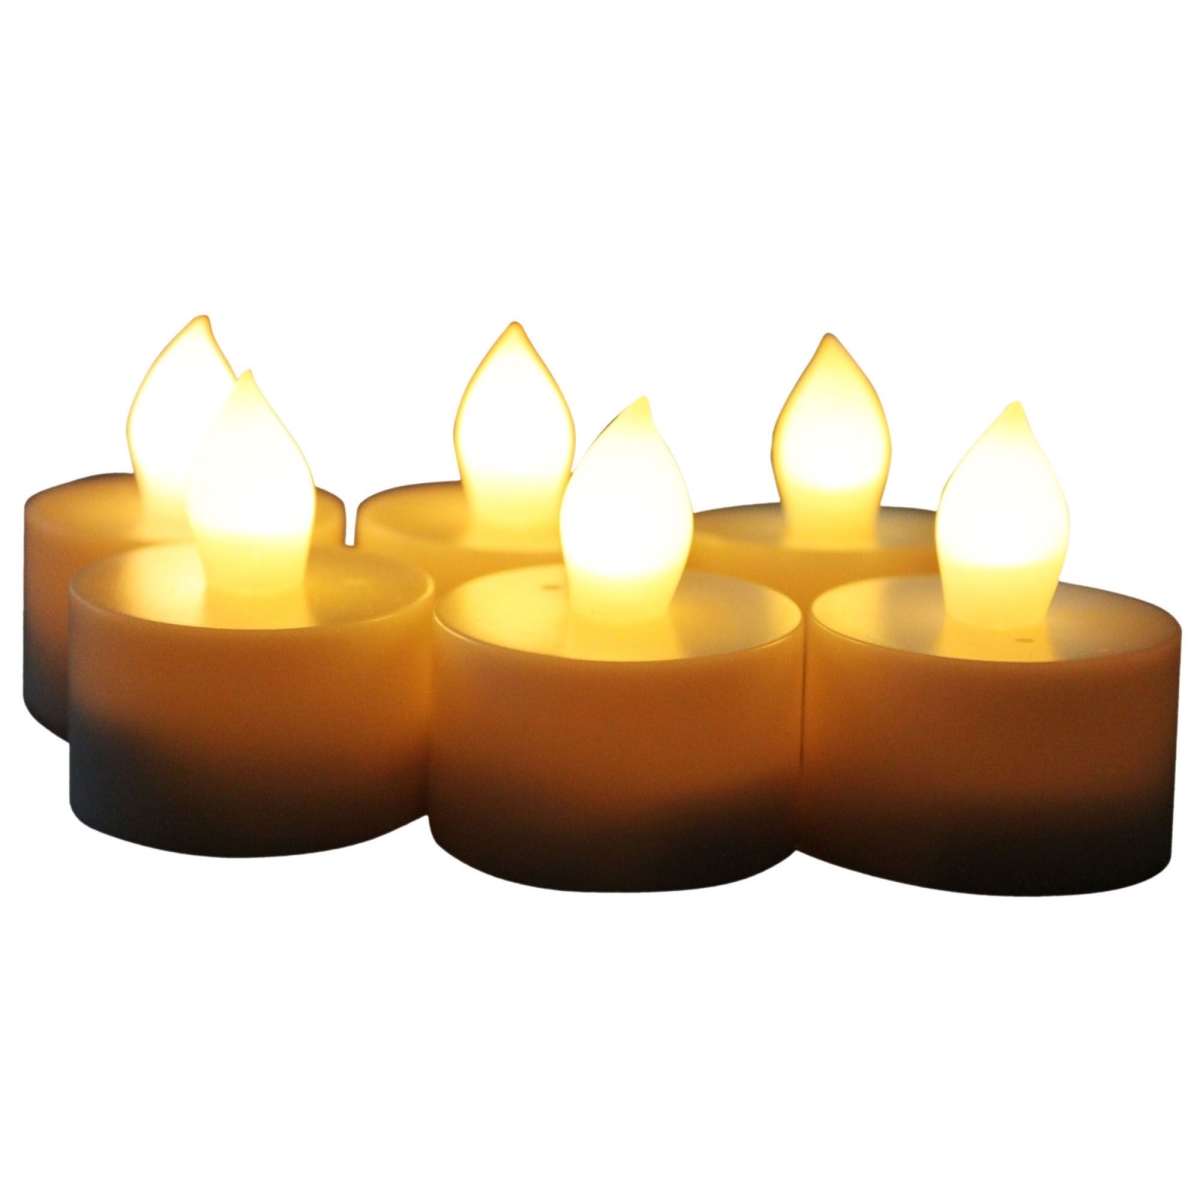 87222-06 Indoor & Outdoor Flameless Led Tealight Candles With 4 Or 8 Hour Timer - Set Of 6